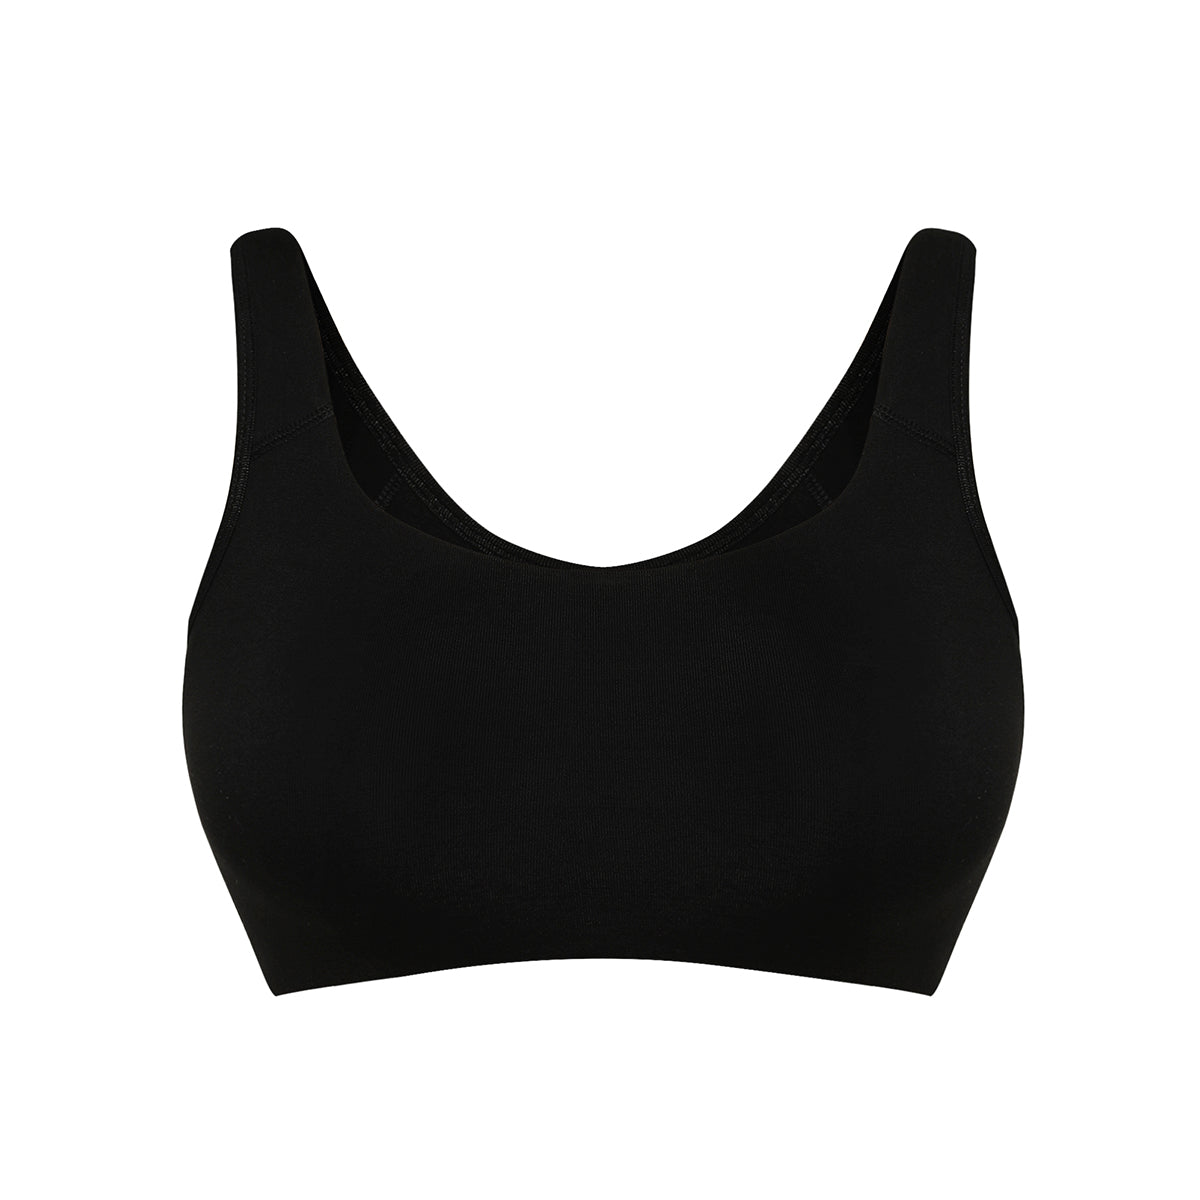 Soft cup easy-peasy slip-on bra with Full coverage - Black NYB113 ...